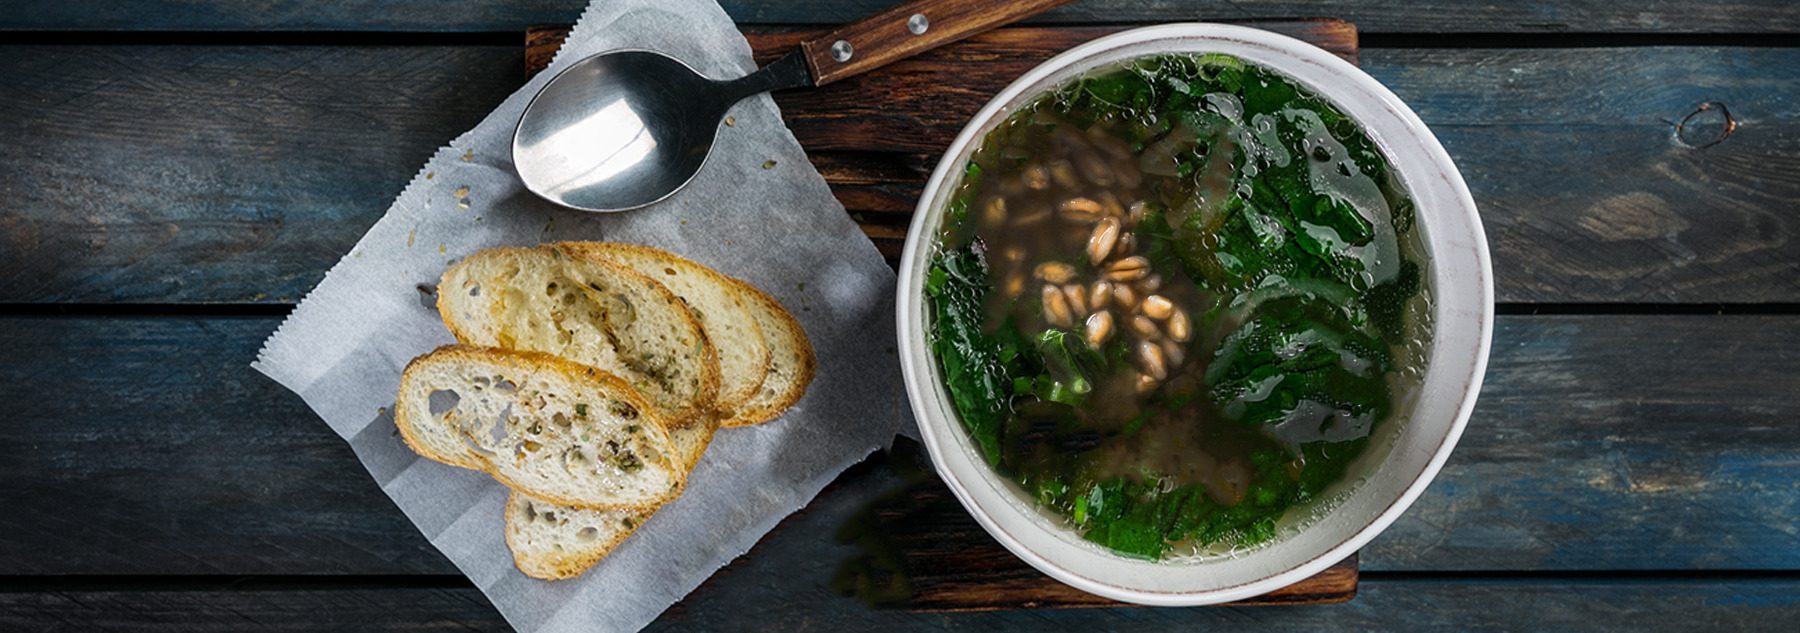 This Brothy Farro Kale Soup Recipe Is the Perfect Late Spring Meal